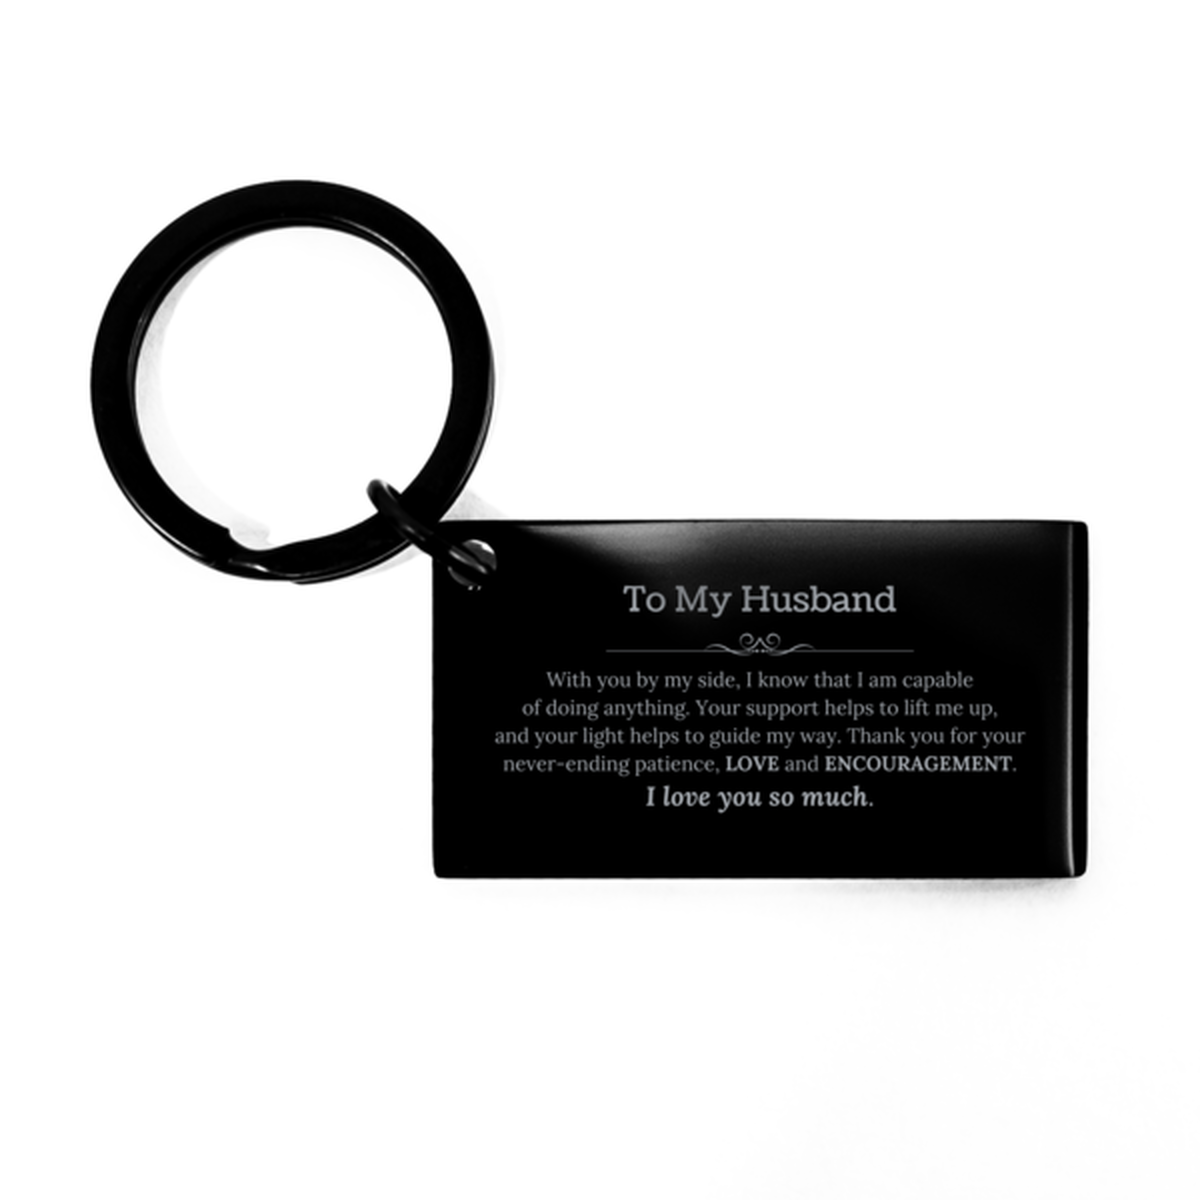 Appreciation Husband Keychain Gifts, To My Husband Birthday Christmas Wedding Keepsake Gifts for Husband With you by my side, I know that I am capable of doing anything. I love you so much